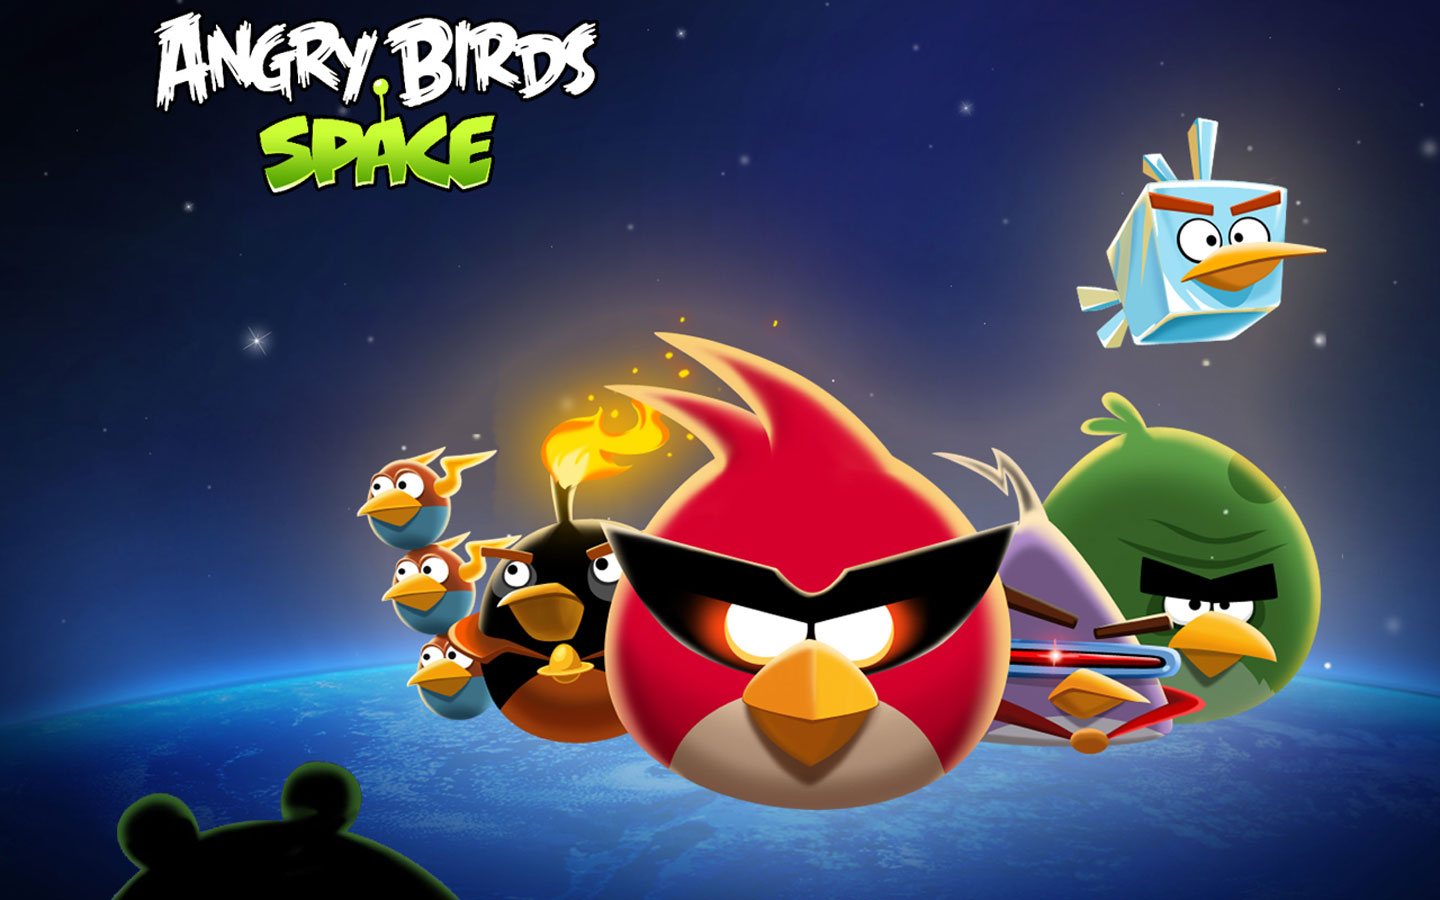 Angry Birds Space Wallpaper - Angry Birds Wallpaper (32221385) - Fanpop